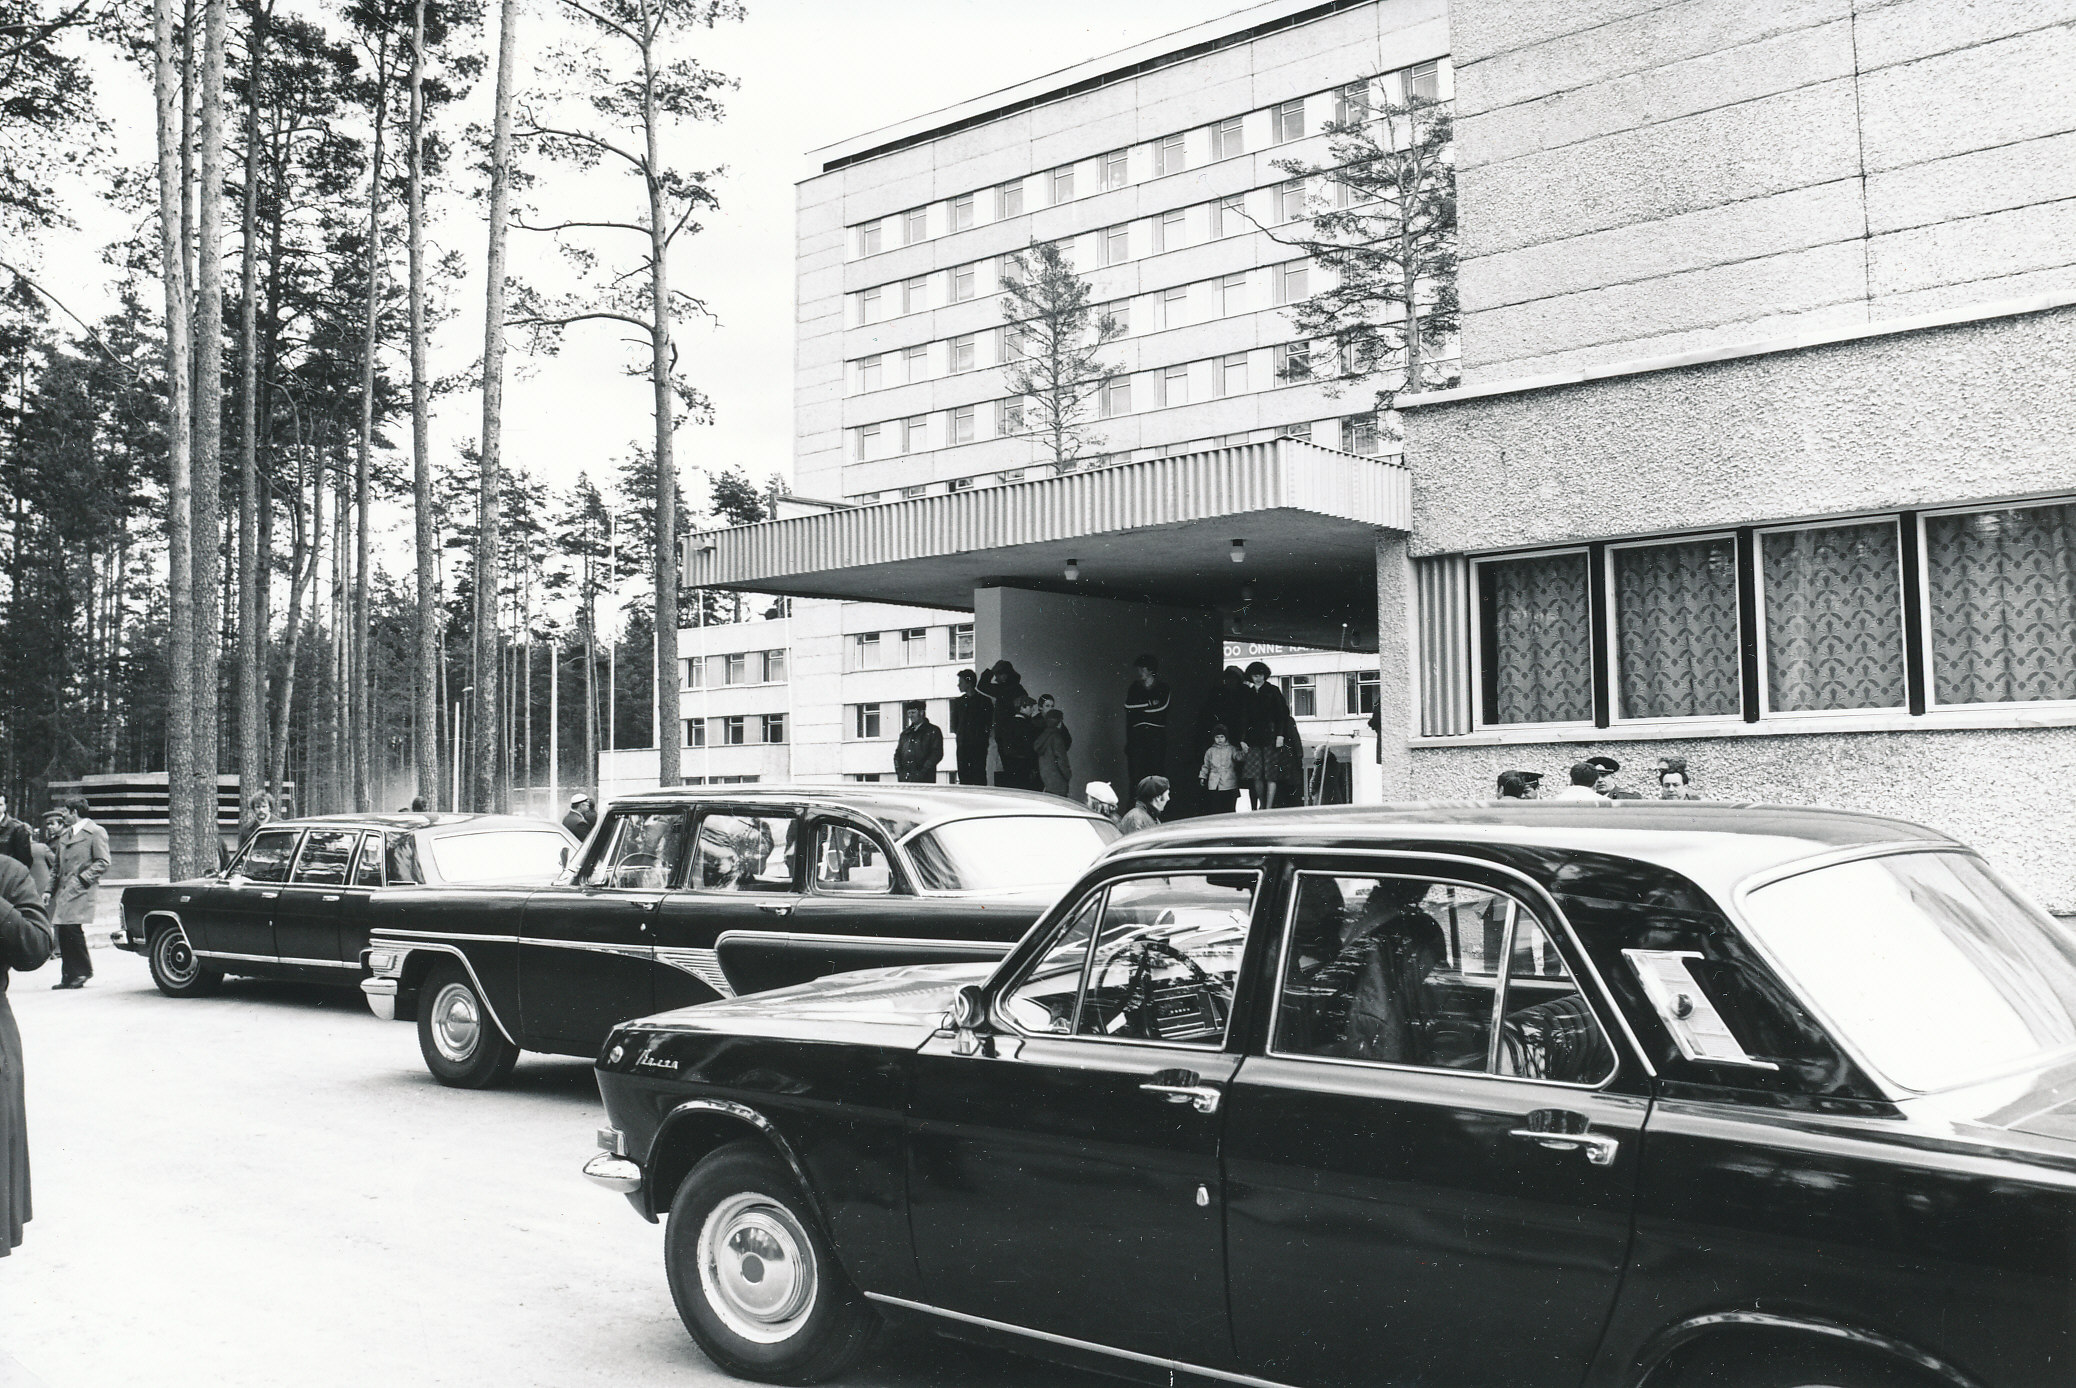 Photo. Opening of Võru Hospital on May 15, 1982. High guest cars in front of the house.